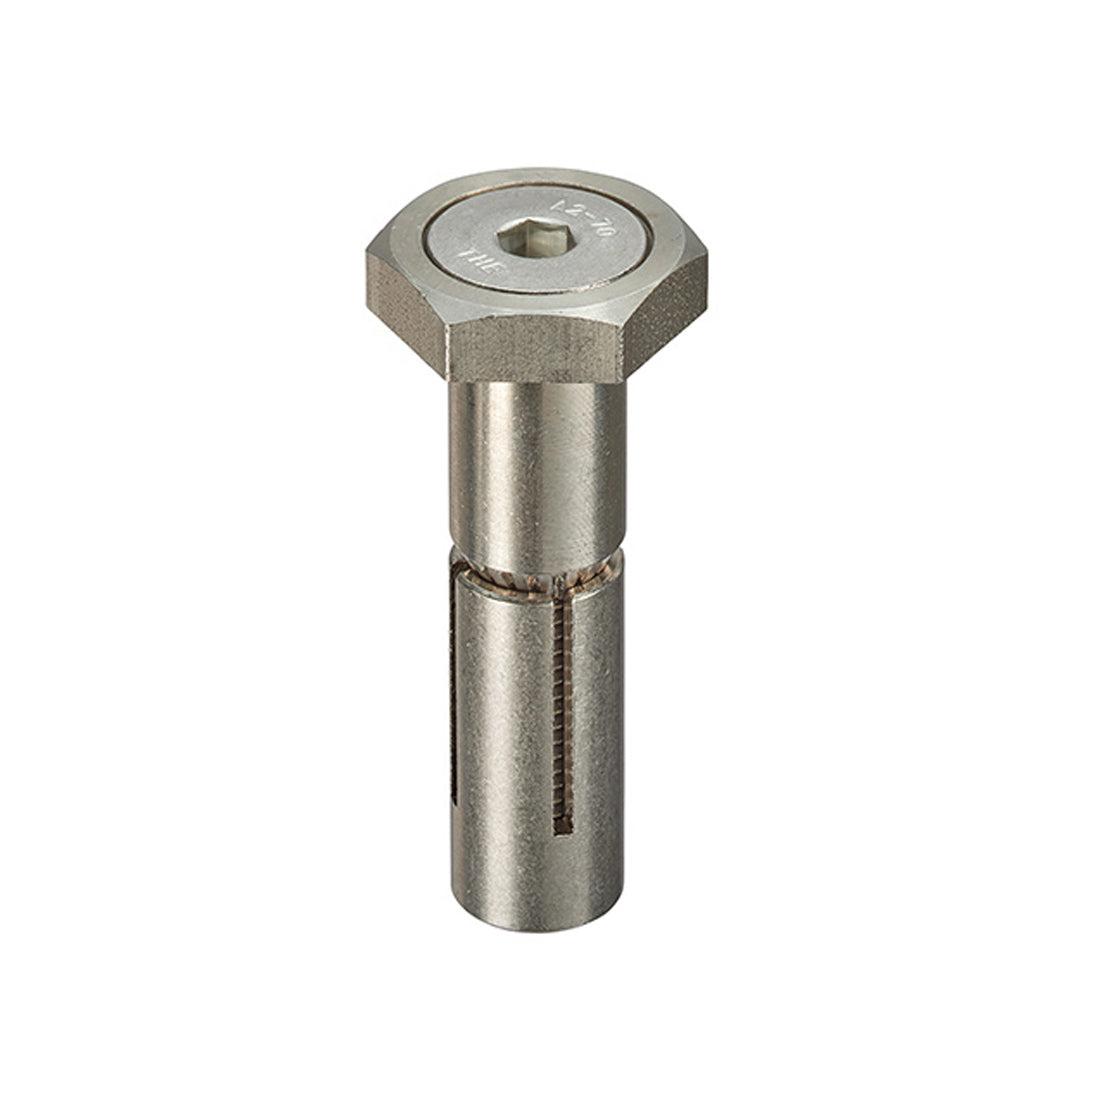 A2-70 Stainless Steel Thin Wall Blind Bolts - 8 x 35mm